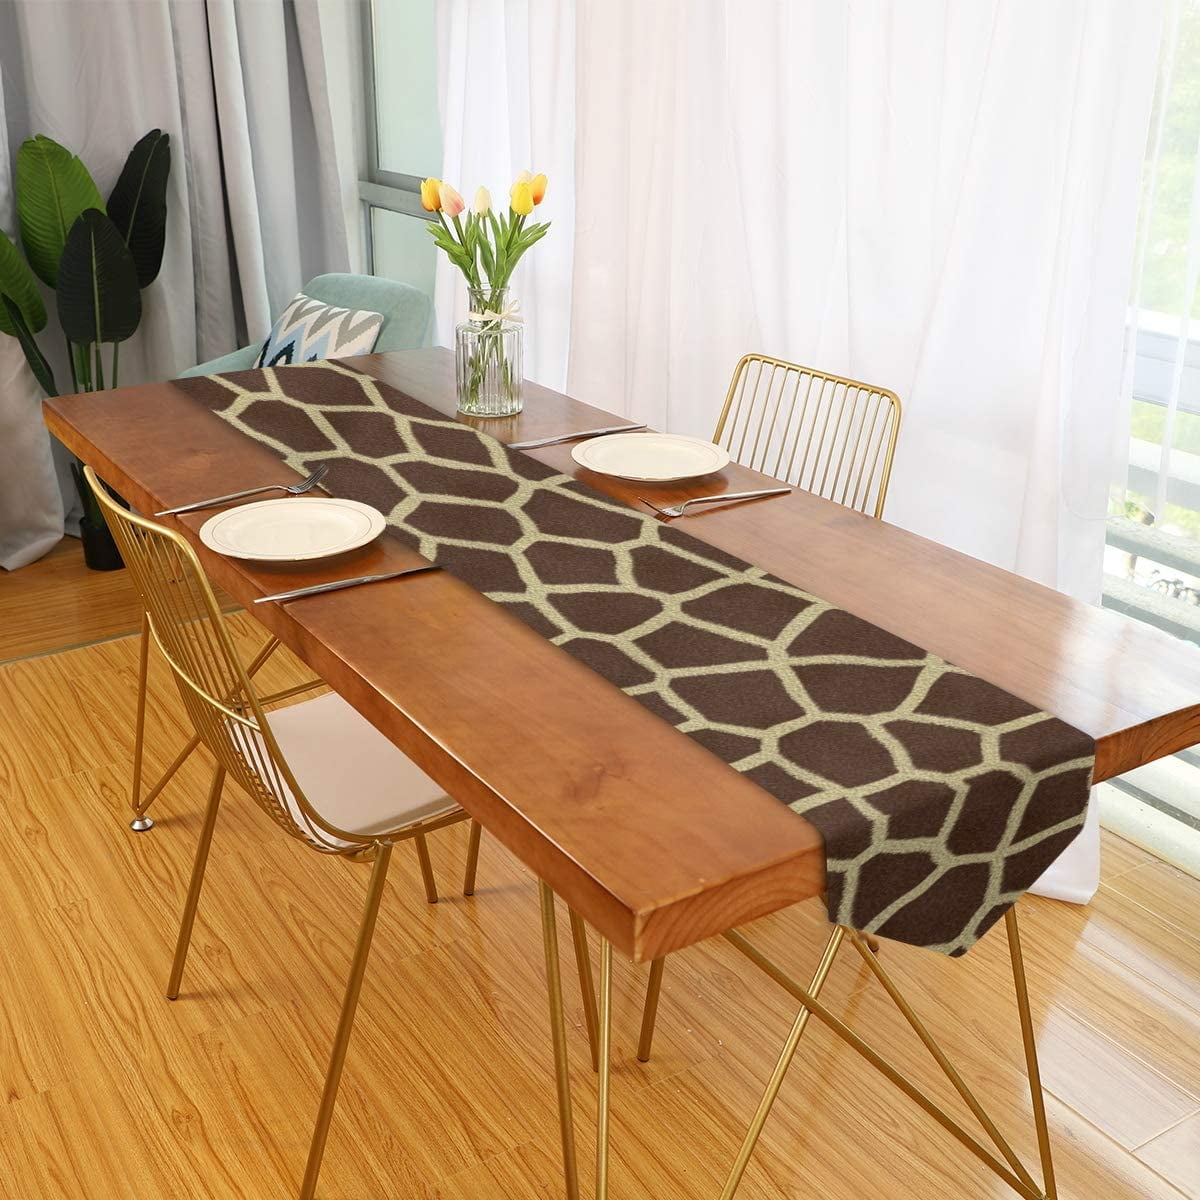 Polyester Double Sided Rectangle Dining Table Cloth Cover for Parties Wedding Farmhouse Garden Holiday Kitchen Home Decor 18 x 72 inches Long Fashionable Camouflage Table Runner